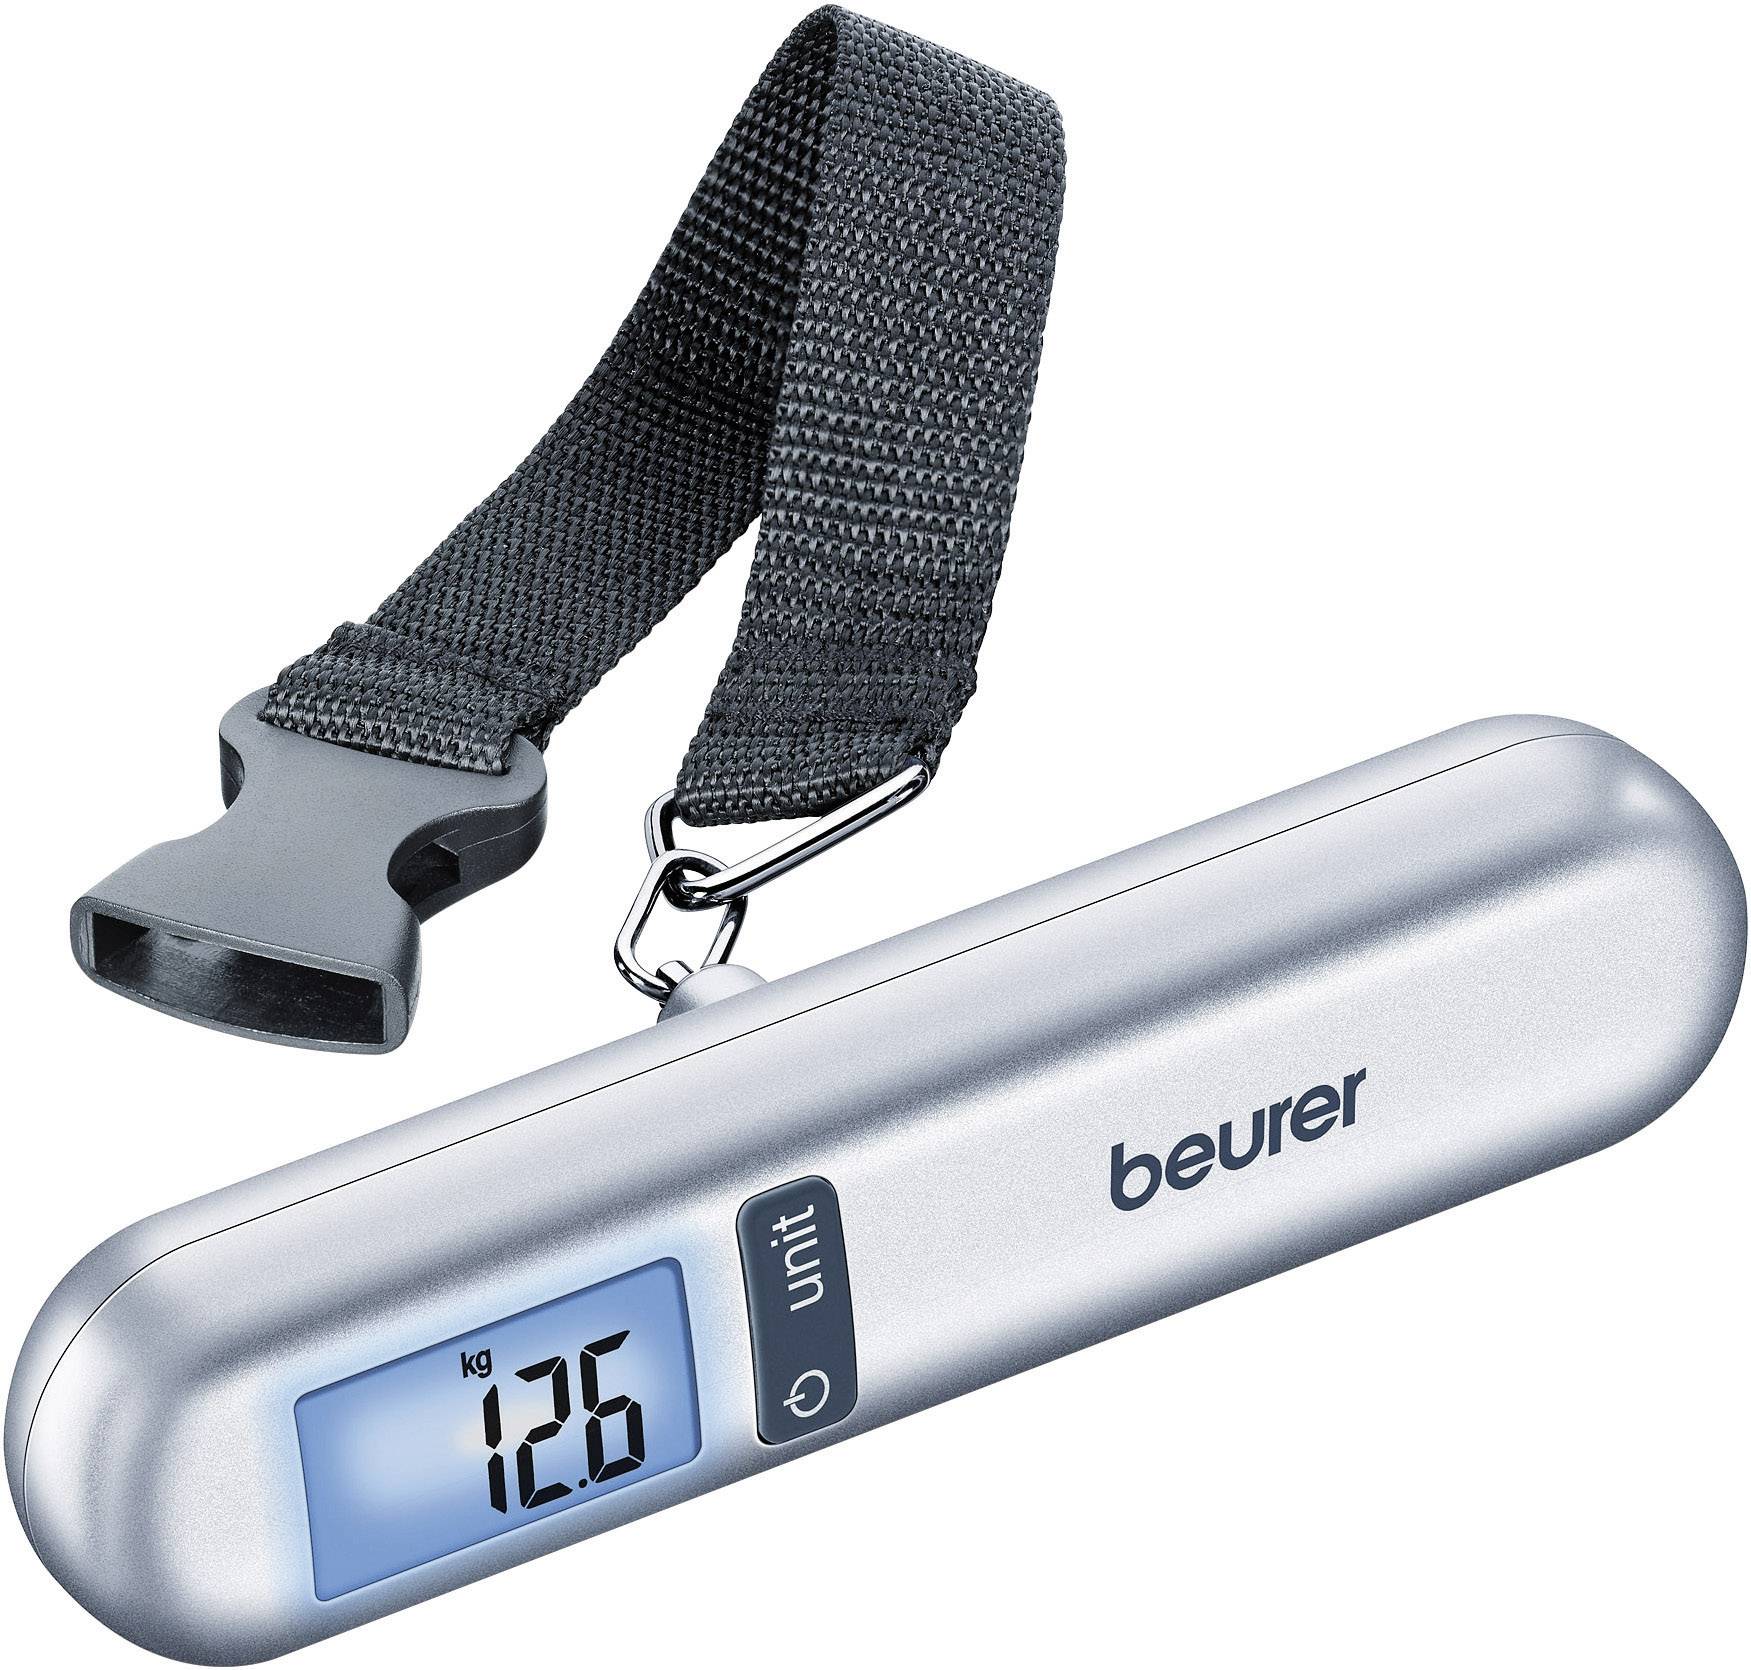 Beurer Luggage Scales Weight Range 40kg